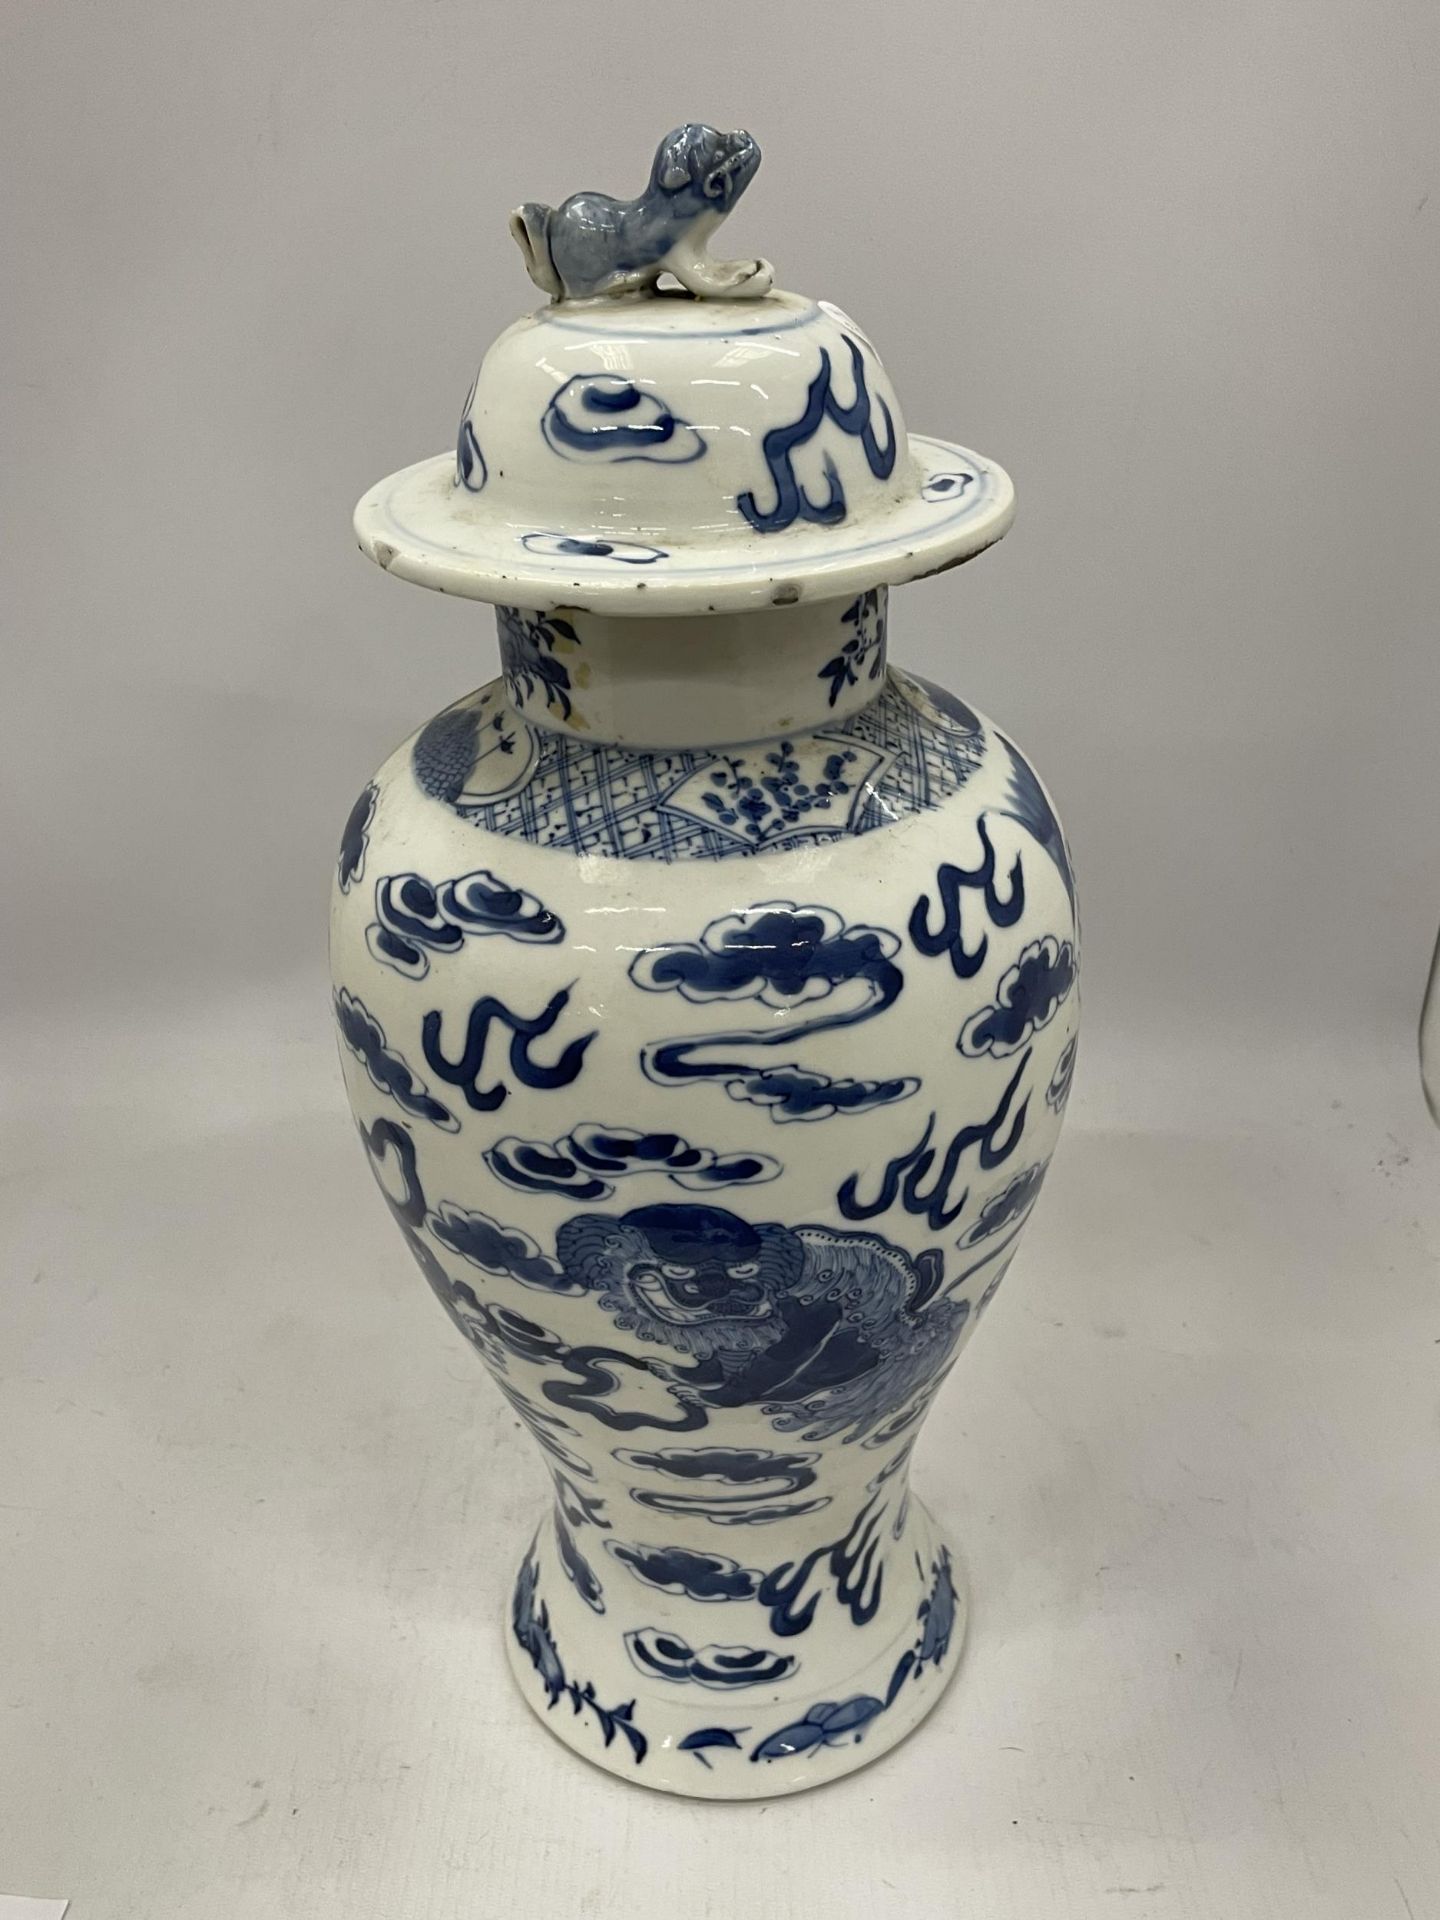 A LATE 19TH / EARLY 20TH CENTURY CHINESE BLUE AND WHITE KANGXI REVIVAL LIDDED VASE WITH MYTHICAL